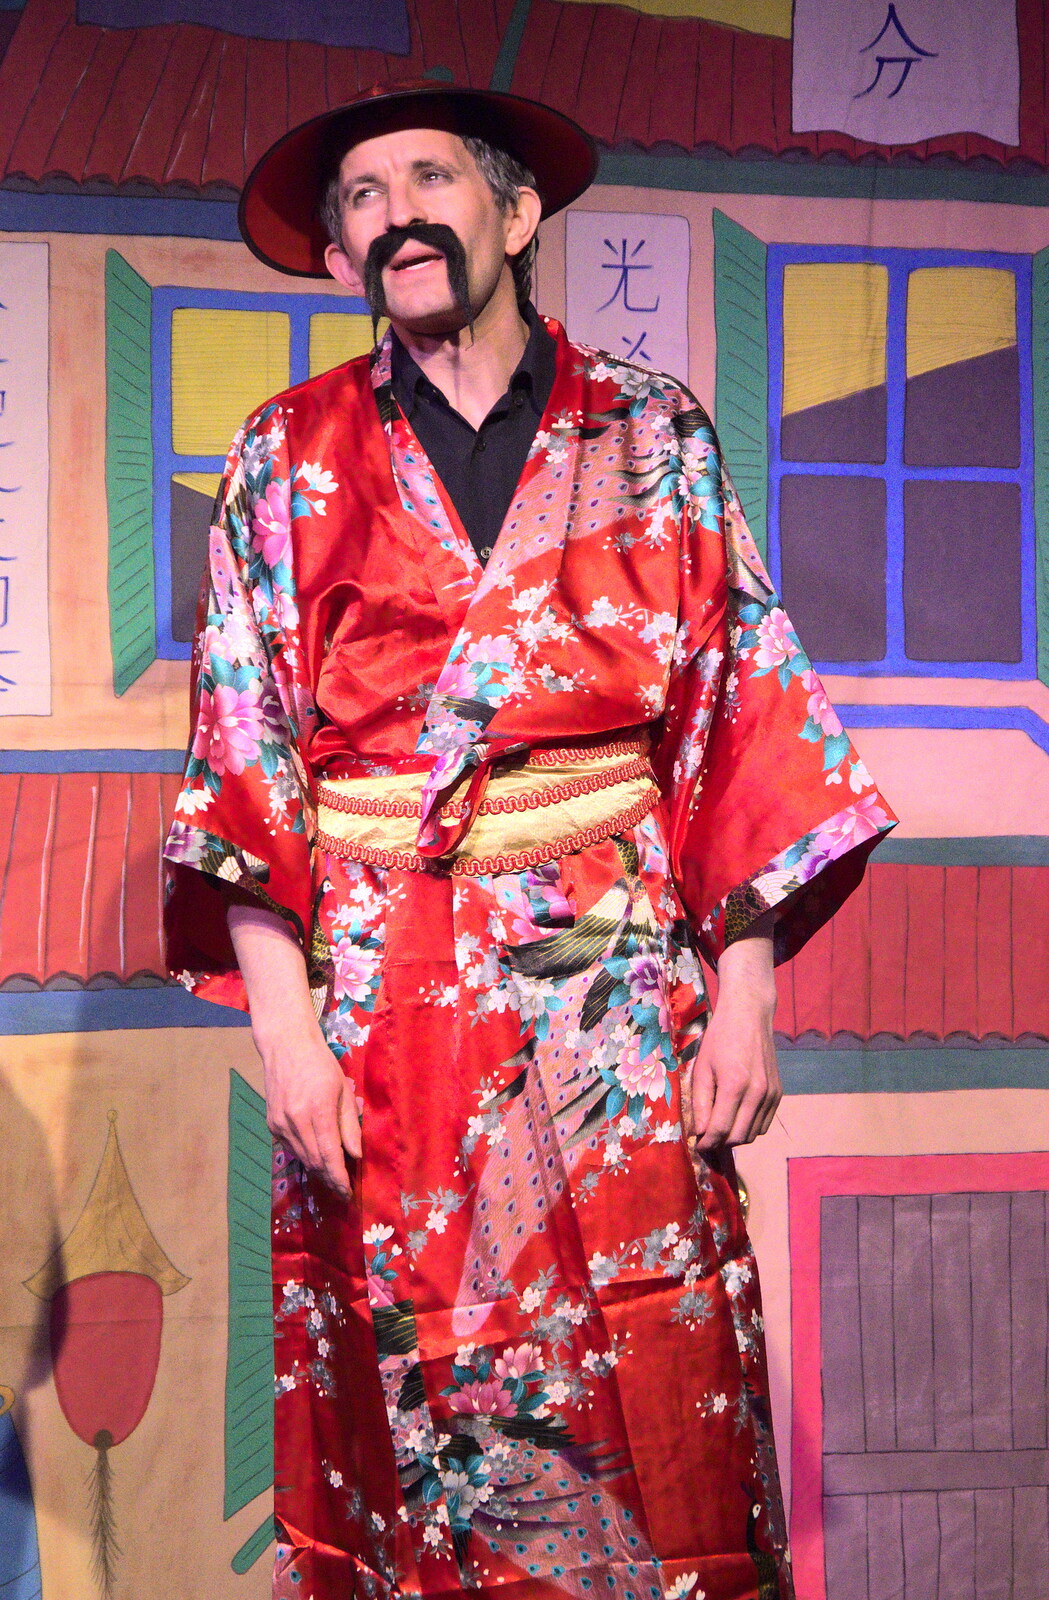 The Emperor makes an appearance from Dove Players do Aladdin, Eye, Suffolk - 10th December 2022